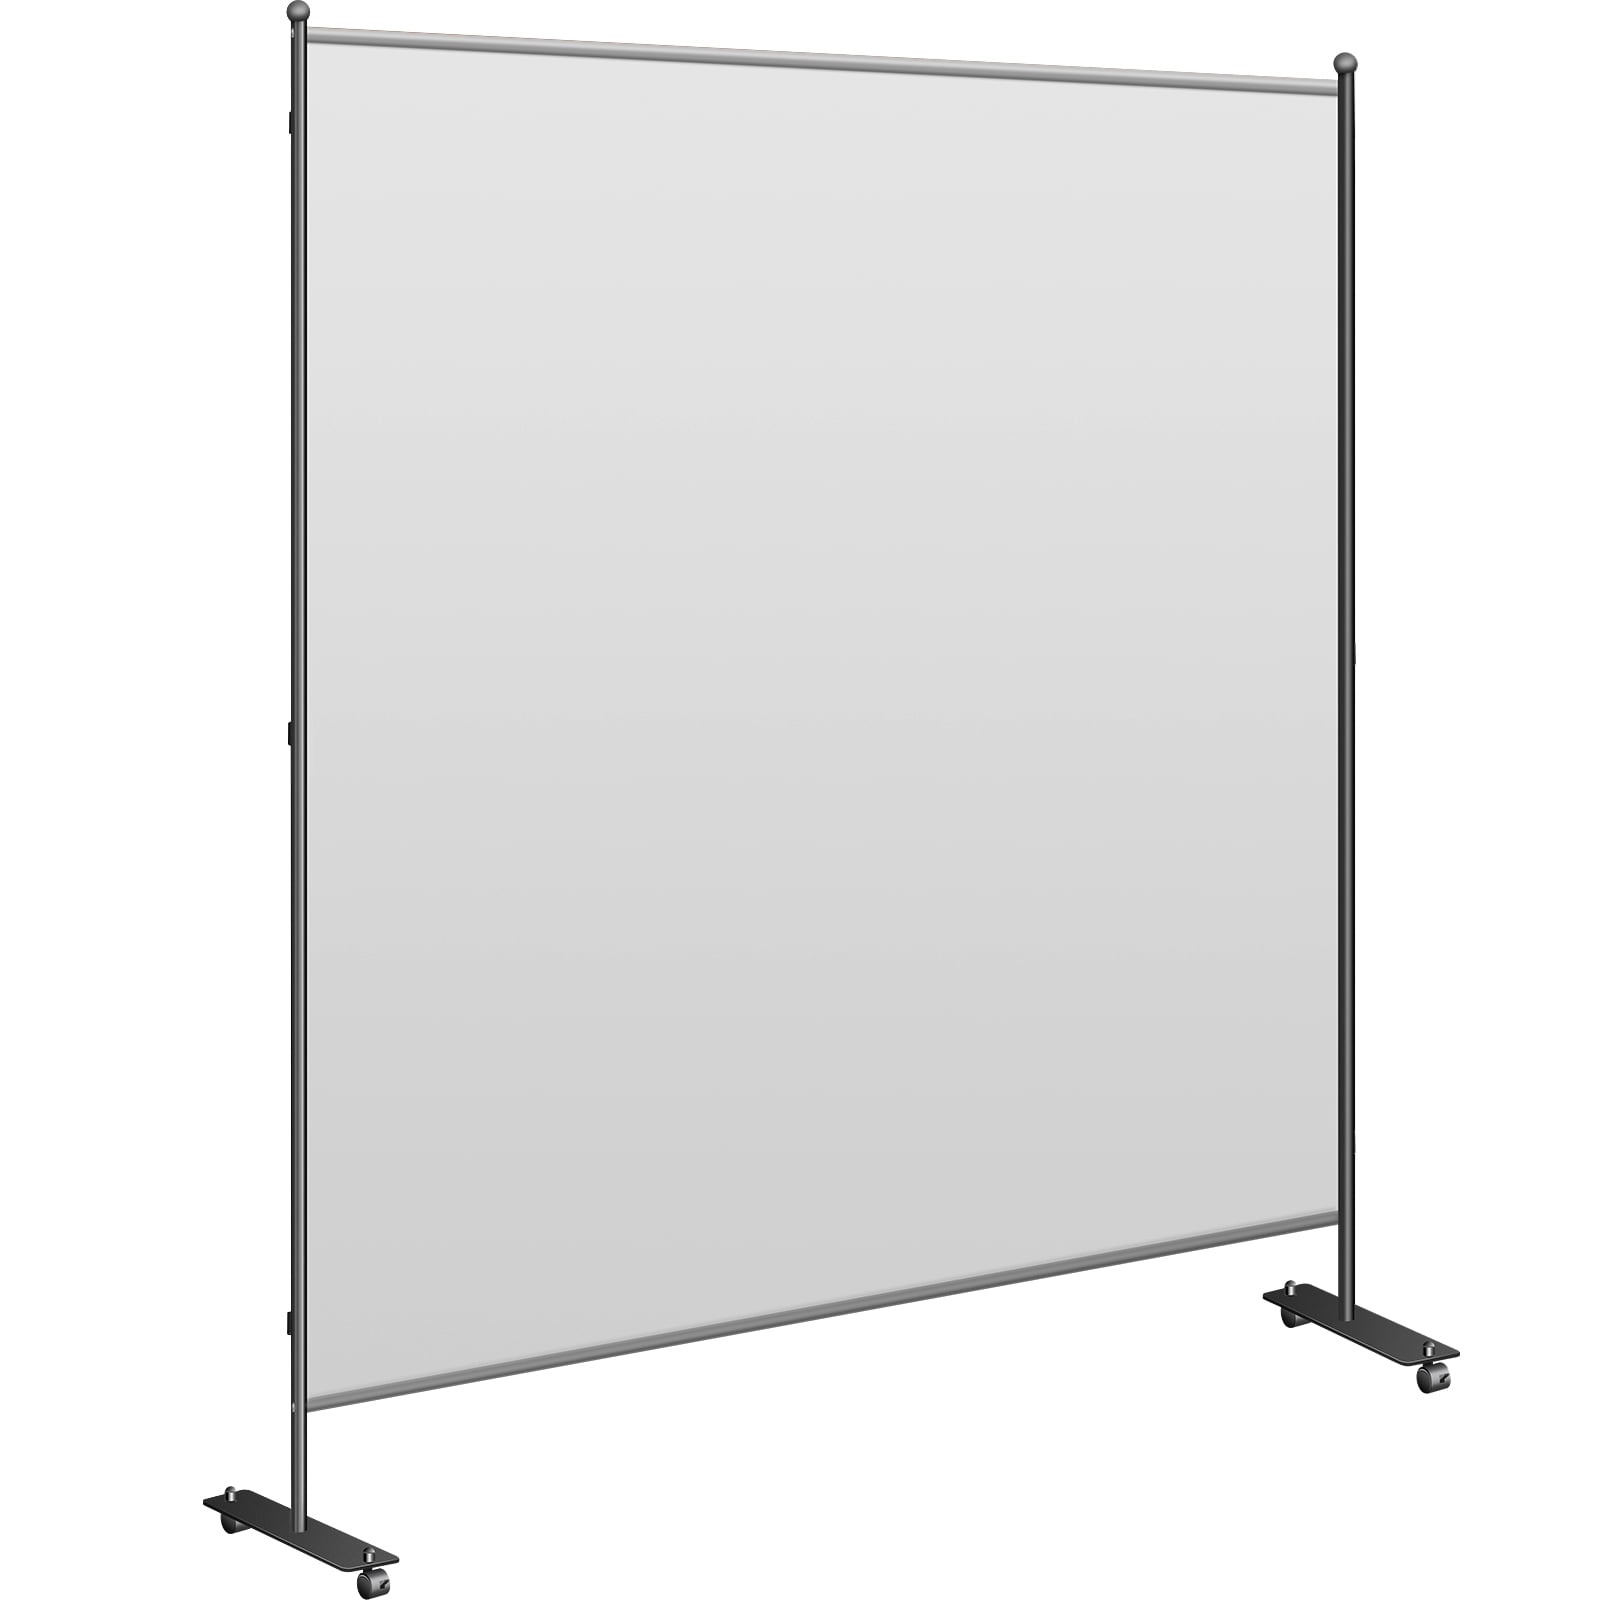 Pacon Privacy Board Pack of 4 White 48 x 16 Inches 